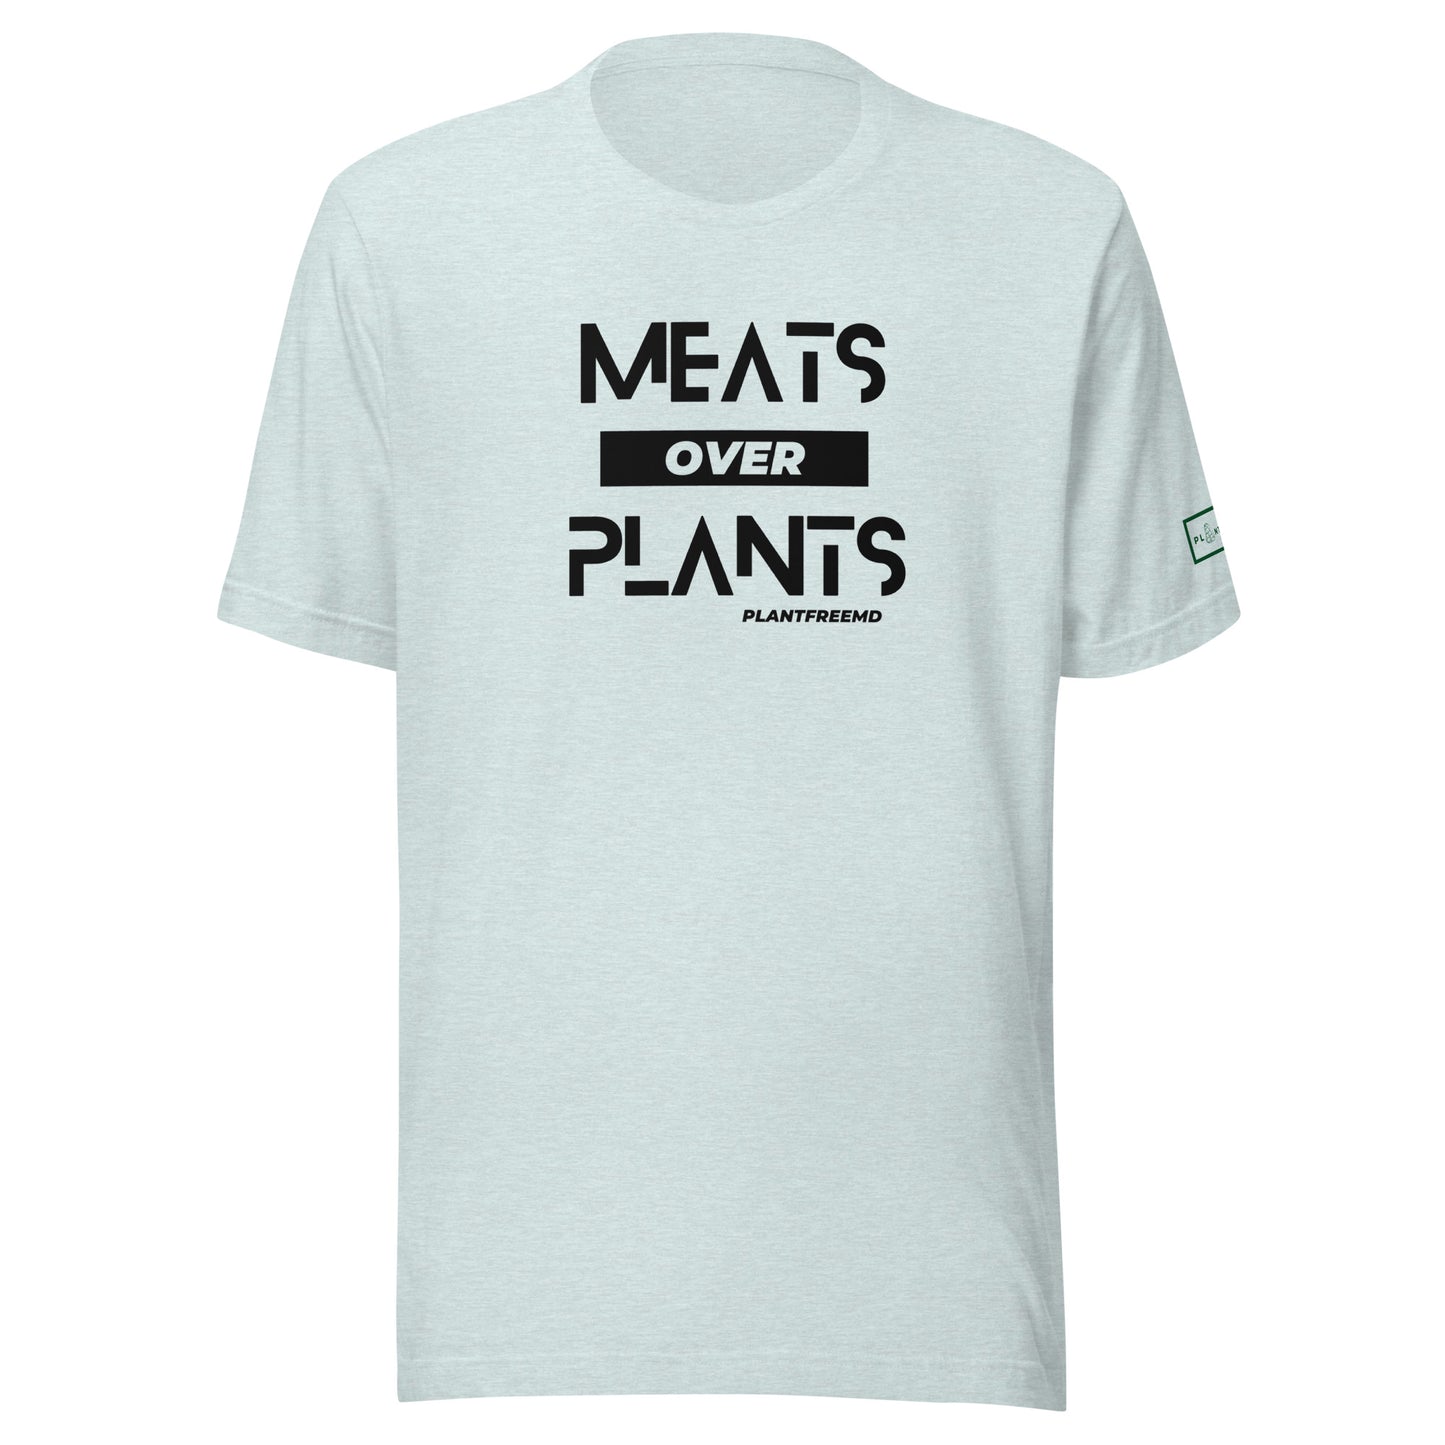 Meats Over Plants Unisex T-shirt Dark w/Embroidery Left Sleeve